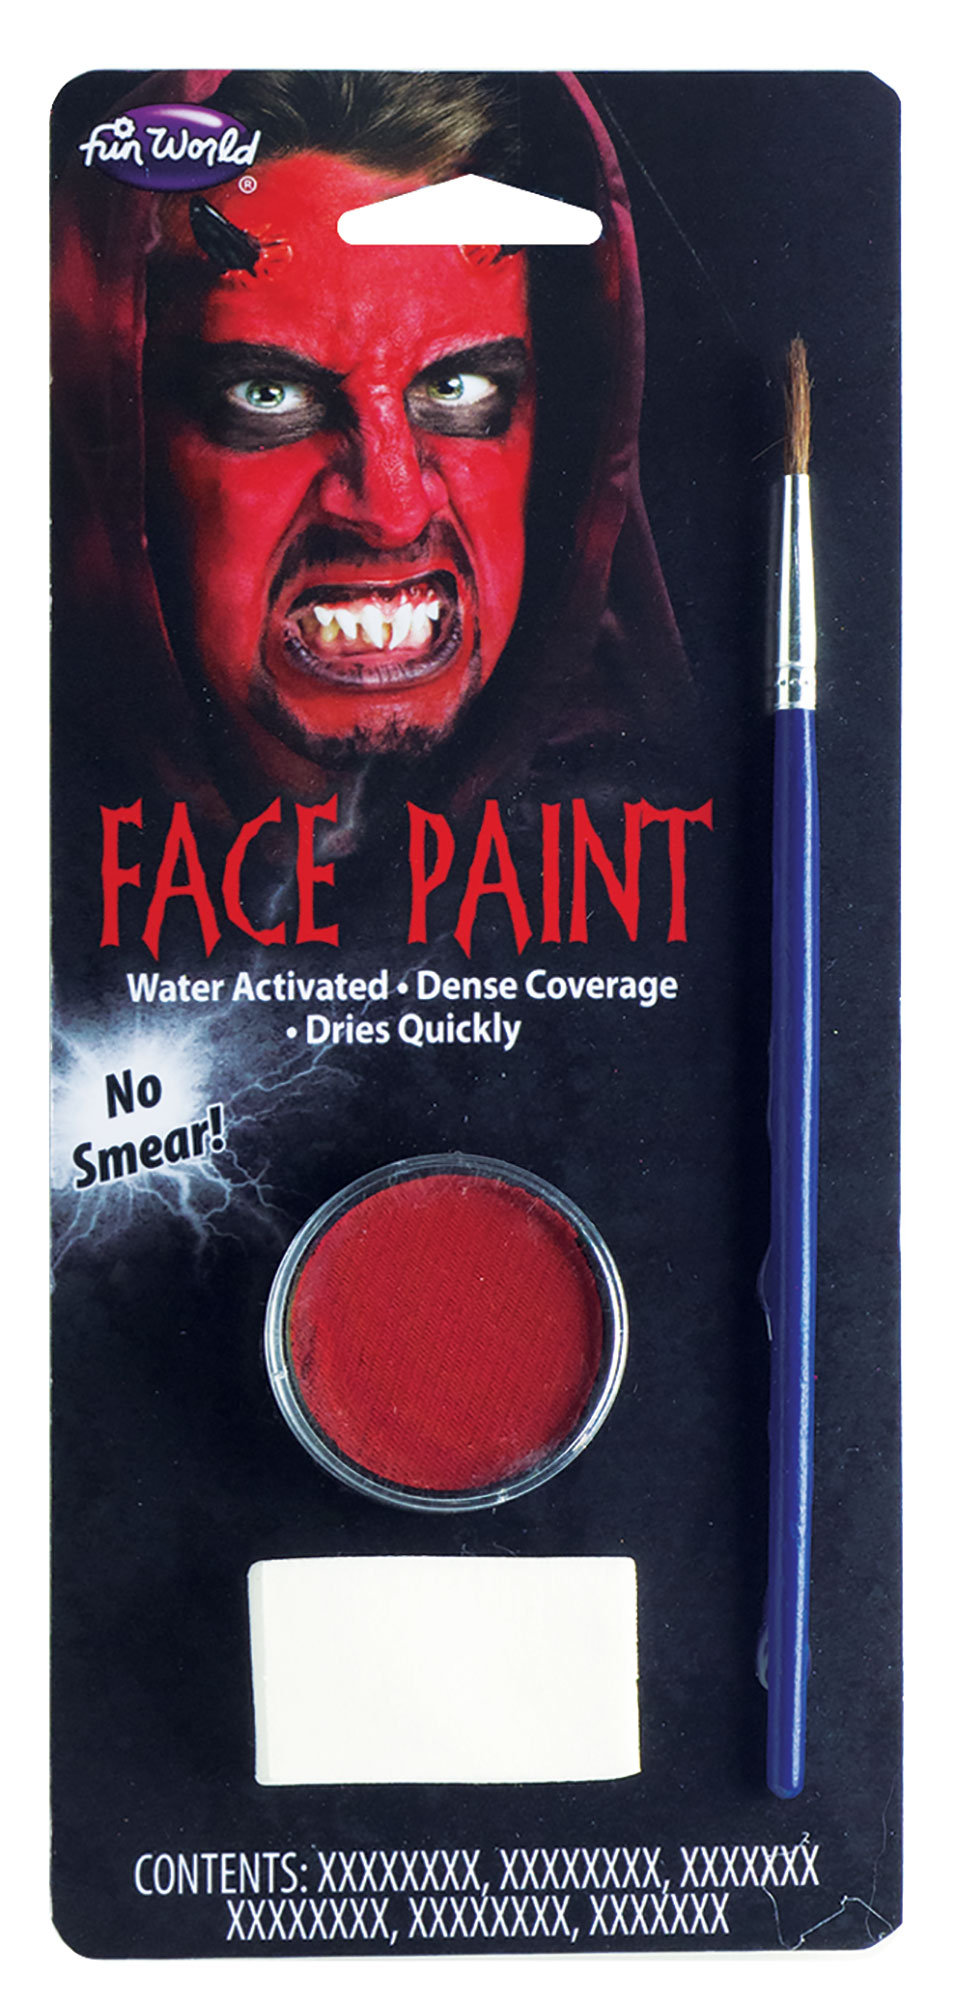 Water Activated Face Paint - Compact